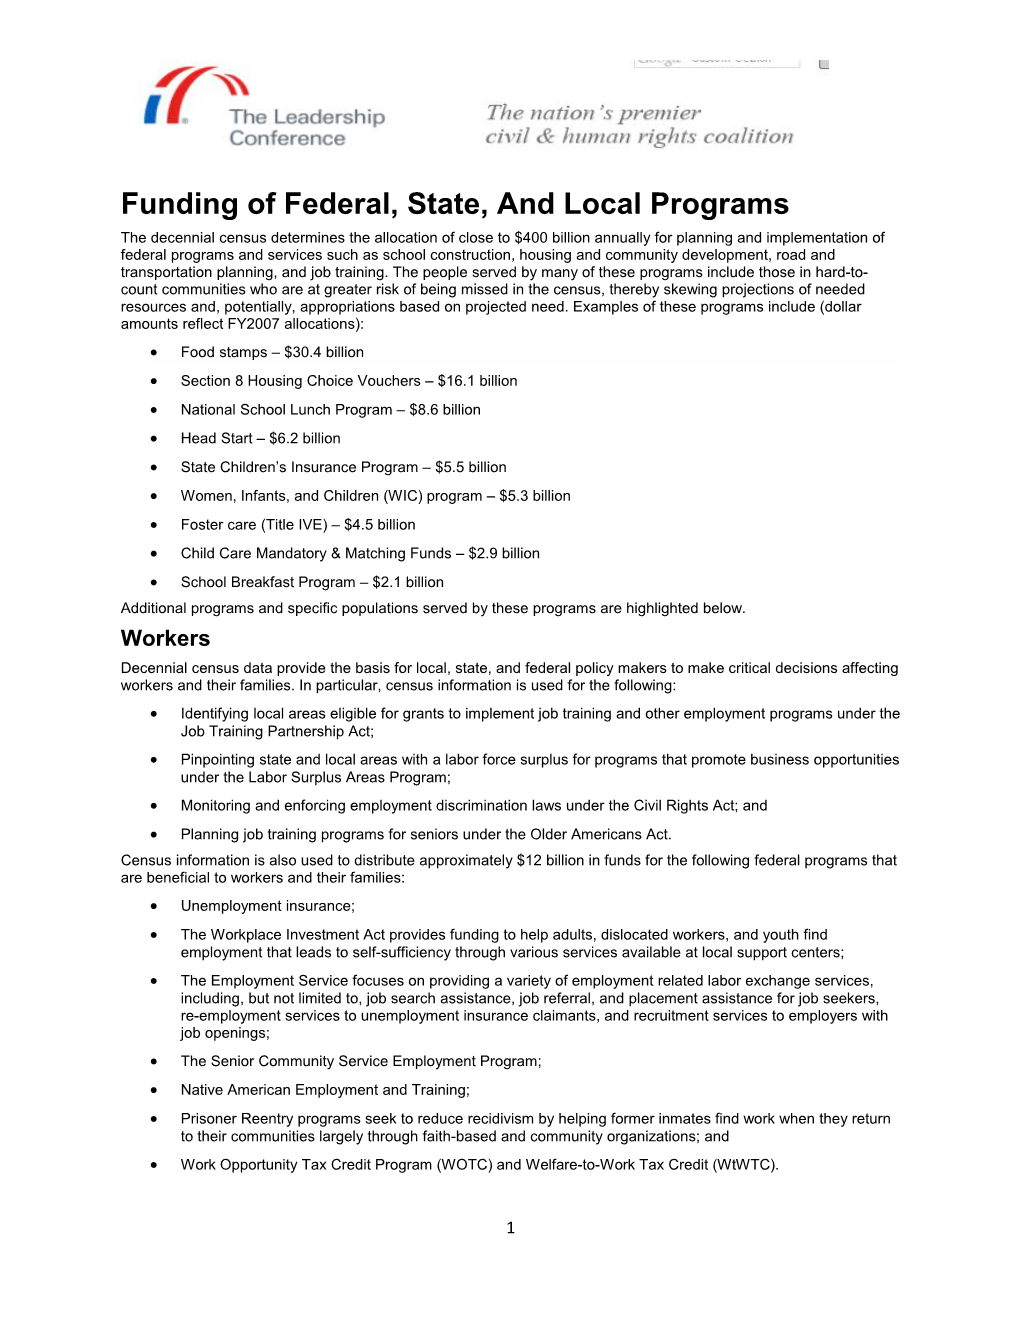 Funding of Federal, State, and Local Programs